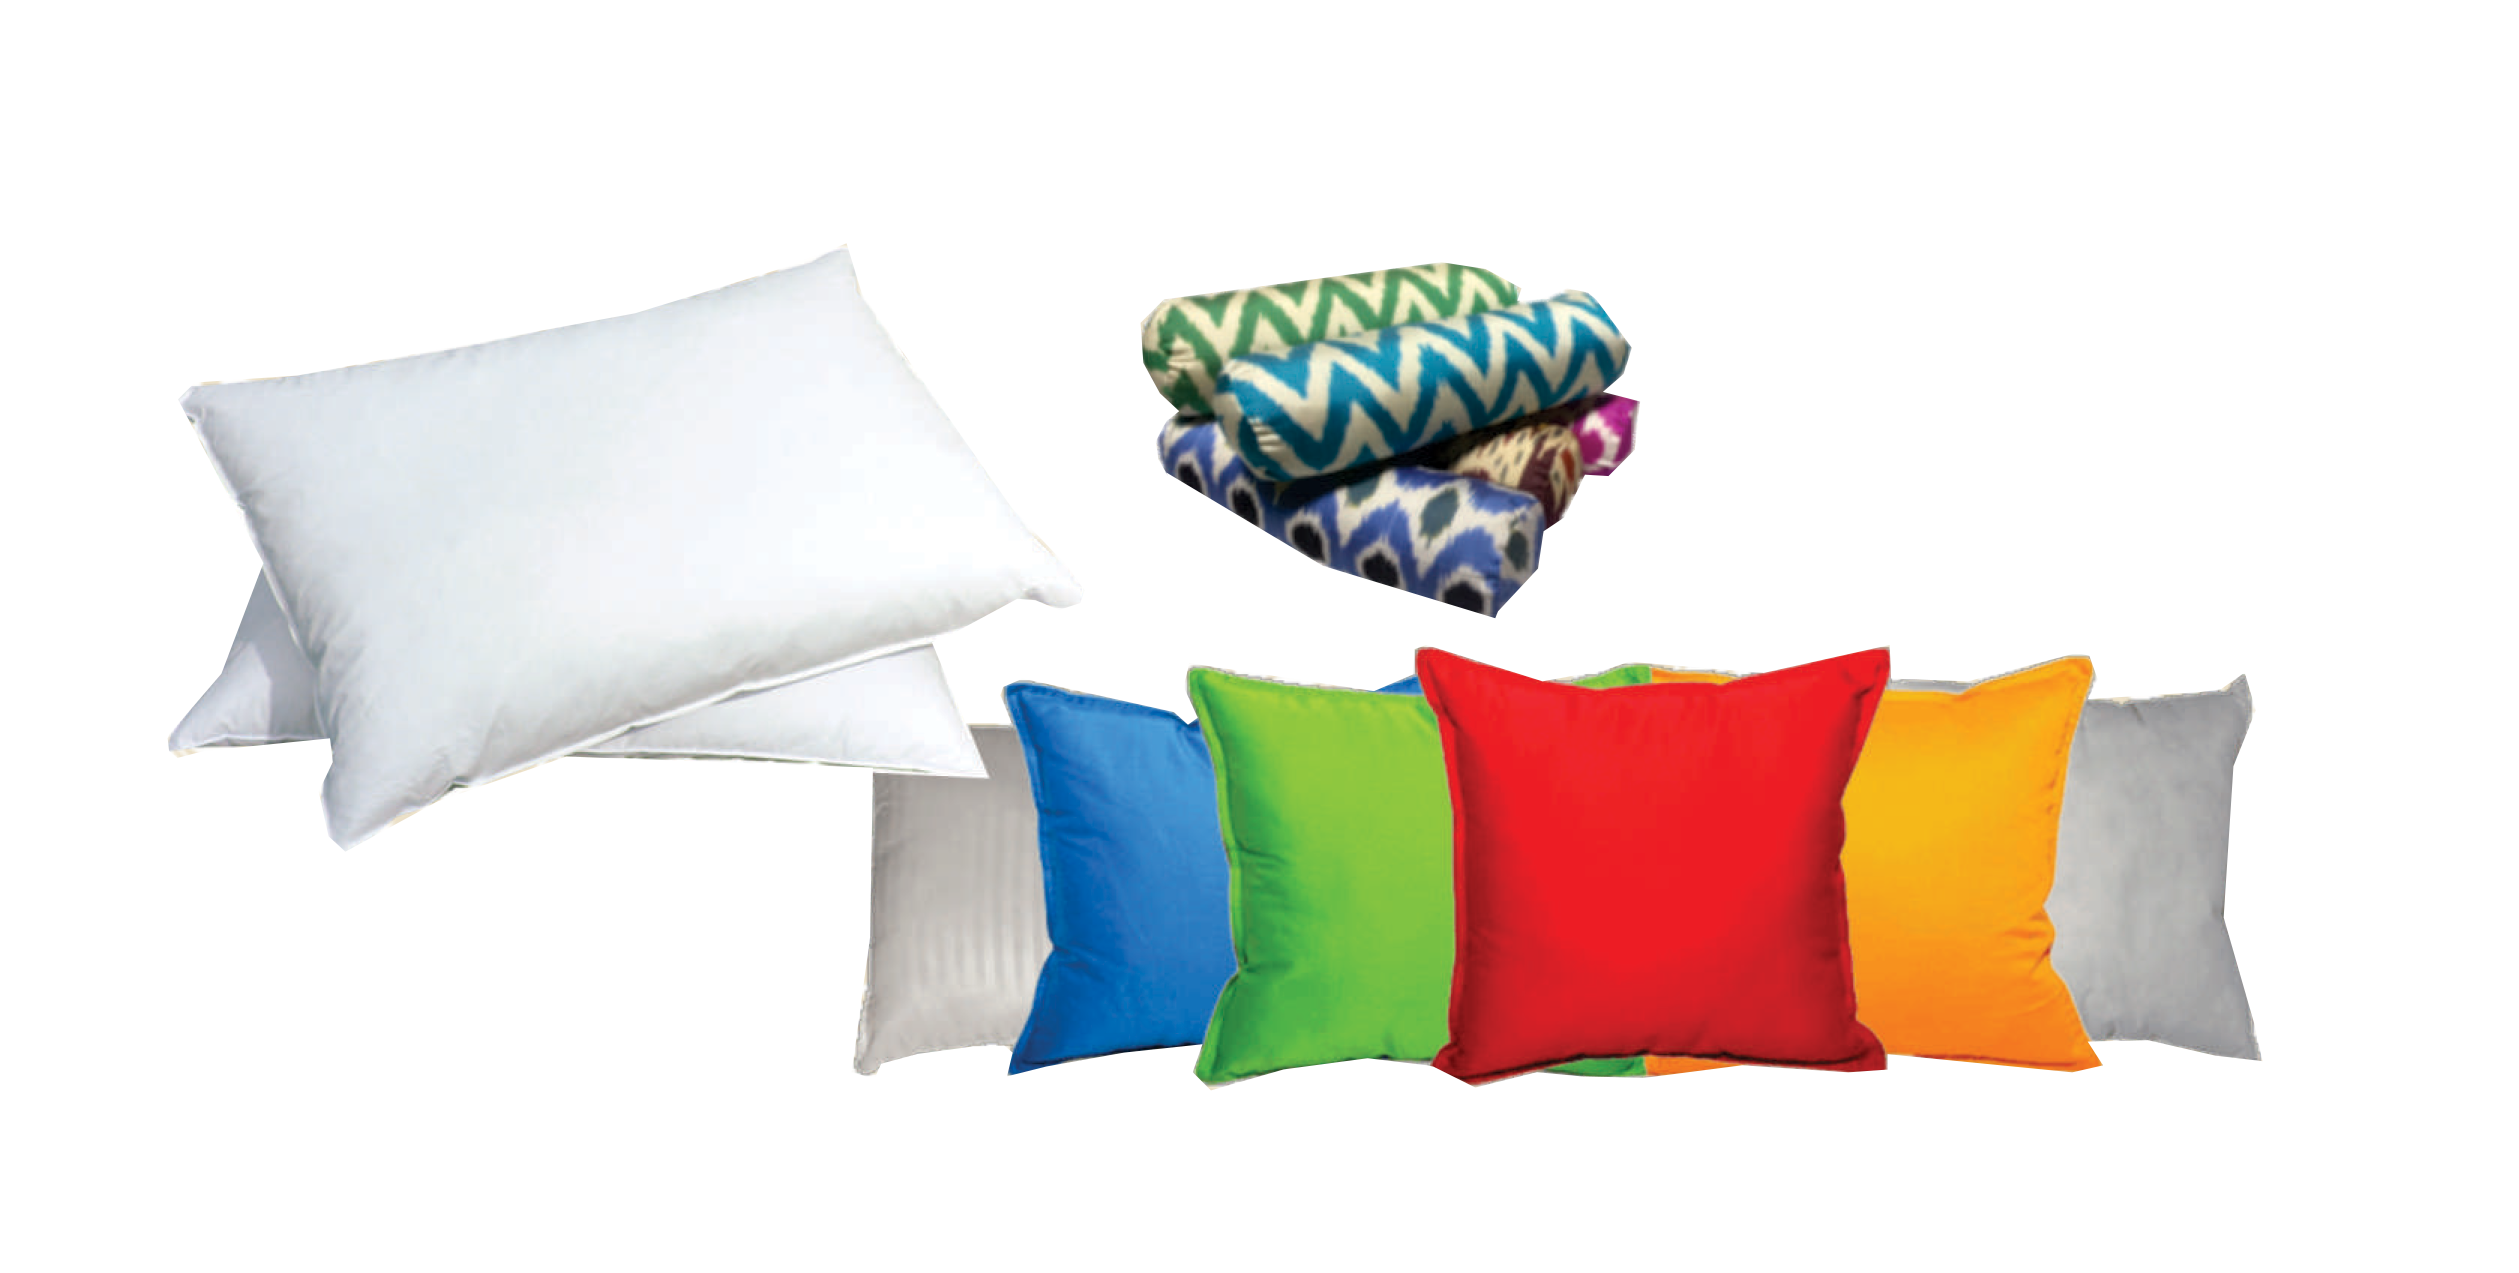 w-pillow and sofa back cushion